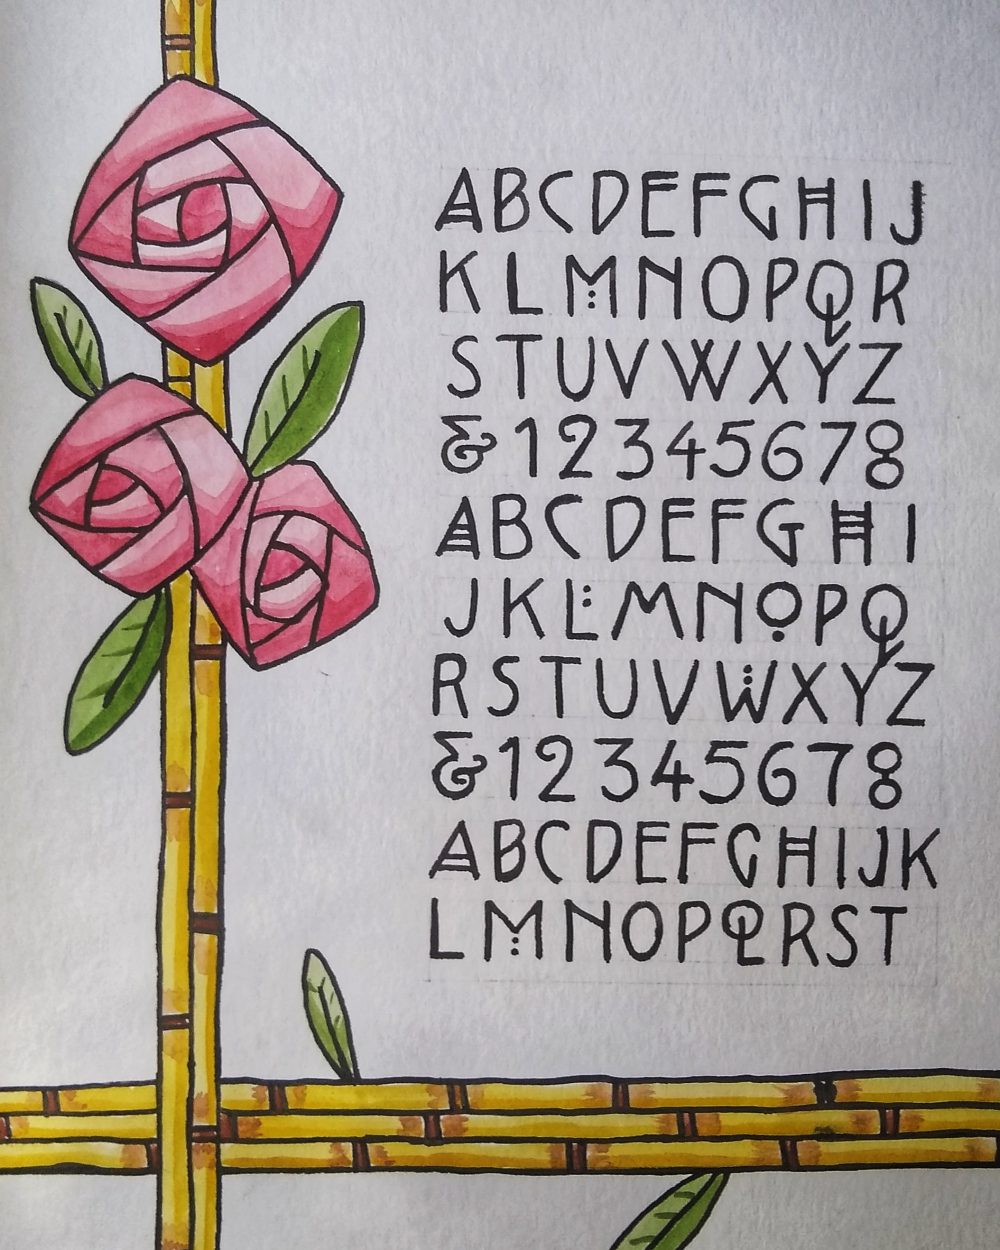 The piece is a full alphabet including numbers in an ornate block letter style, and framed on the left and bottom sides with some bamboo stalks and roses on the top left.